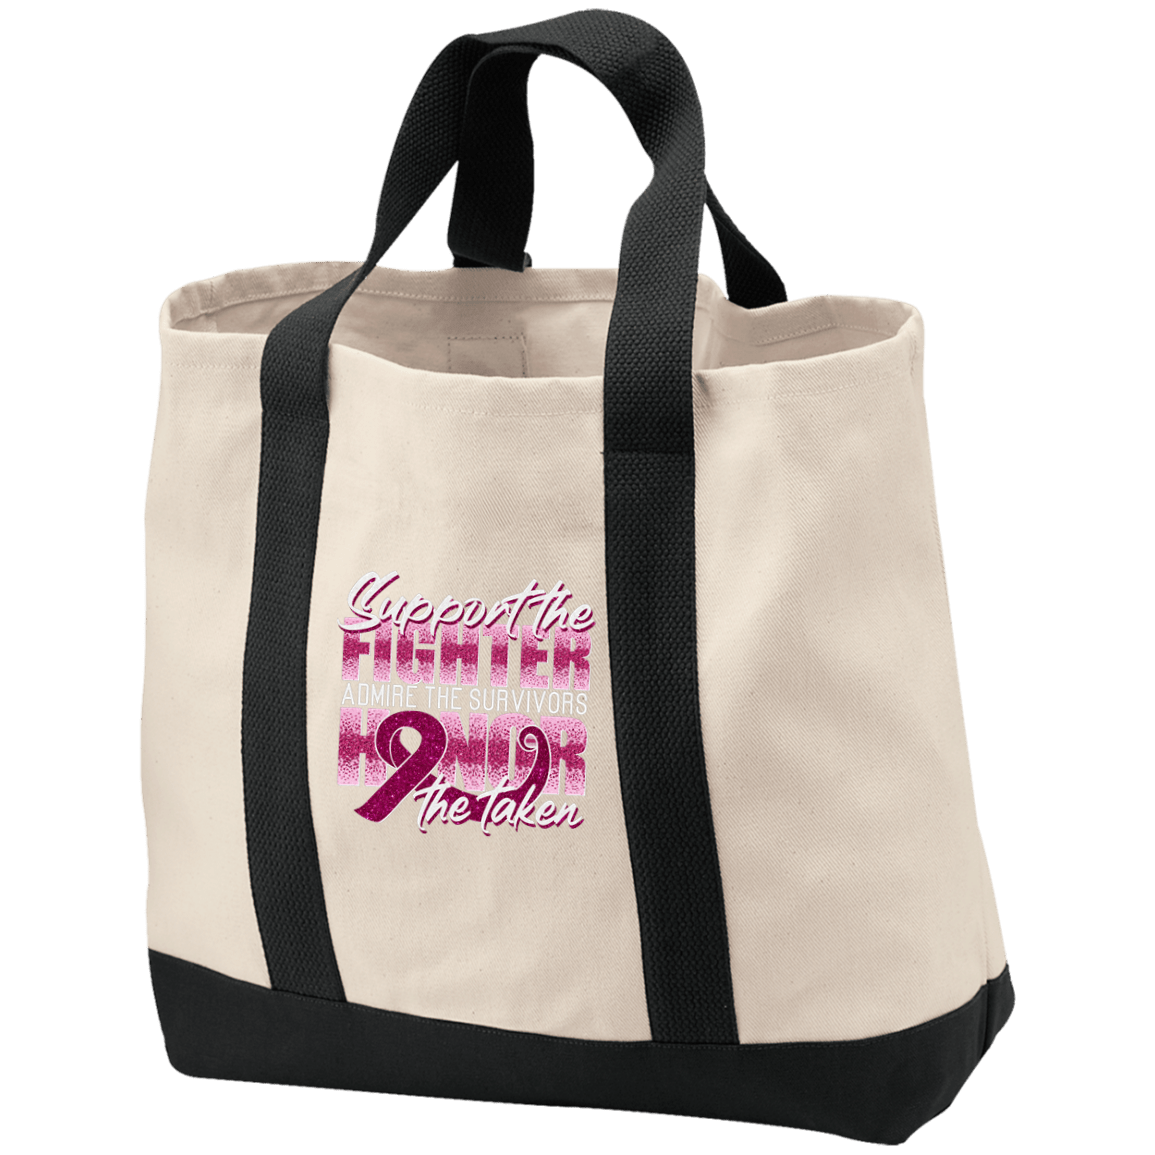 Support Admire Honor Embroidery Canvas Tote